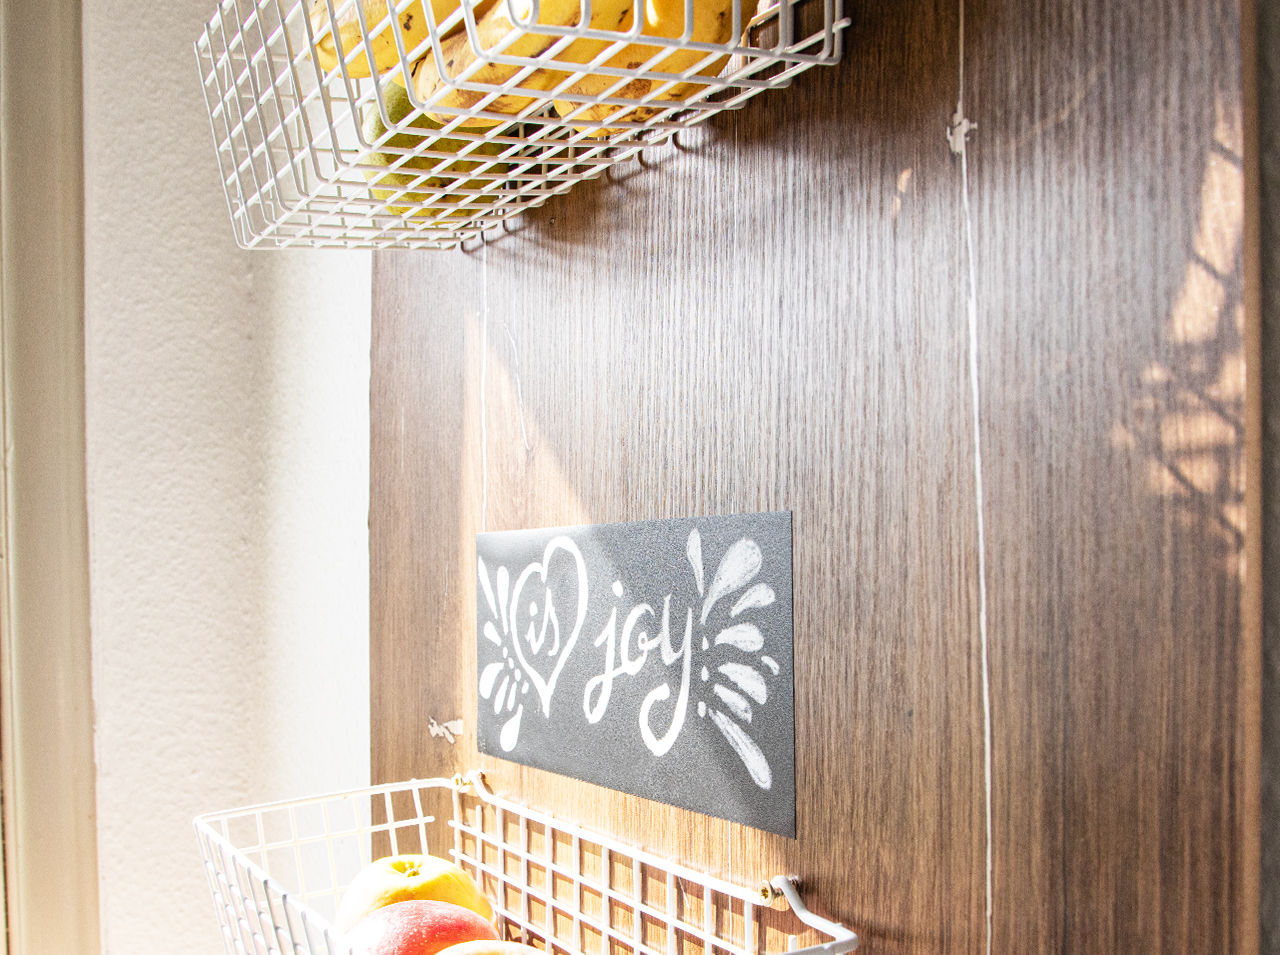 Board for the kitchen wall with a dark wood effect and mounted metal mesh baskets.